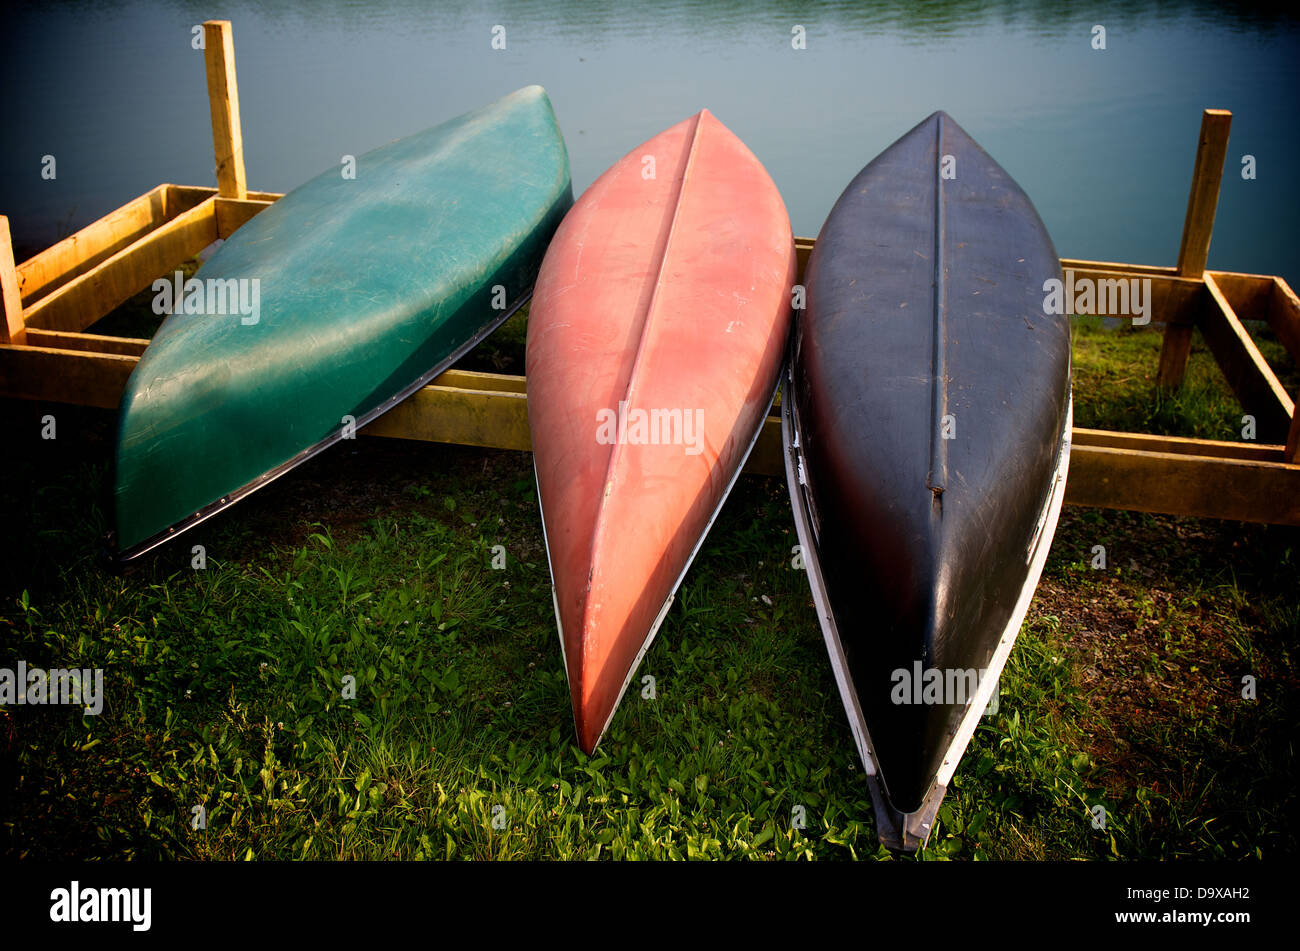 Canoes by a lake Stock Photo